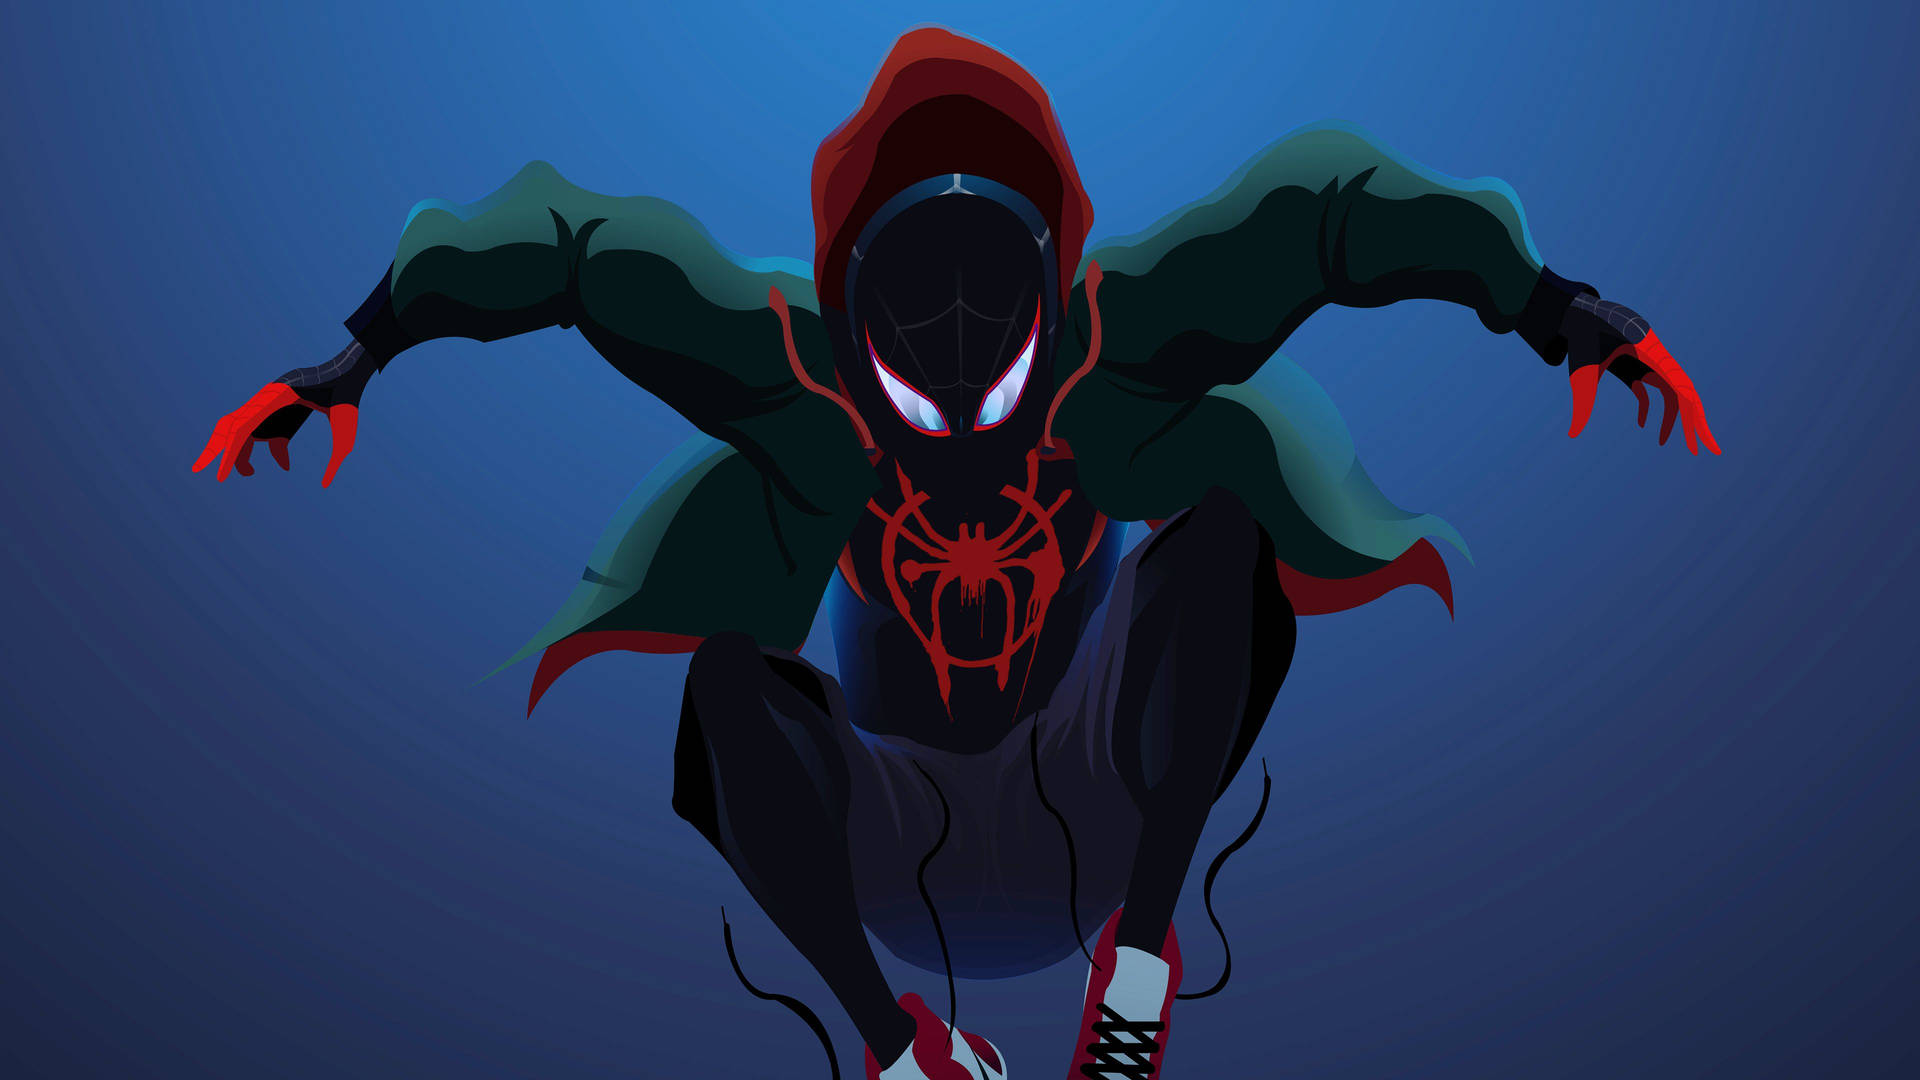 Spider-Man Leaping in Action Wallpaper